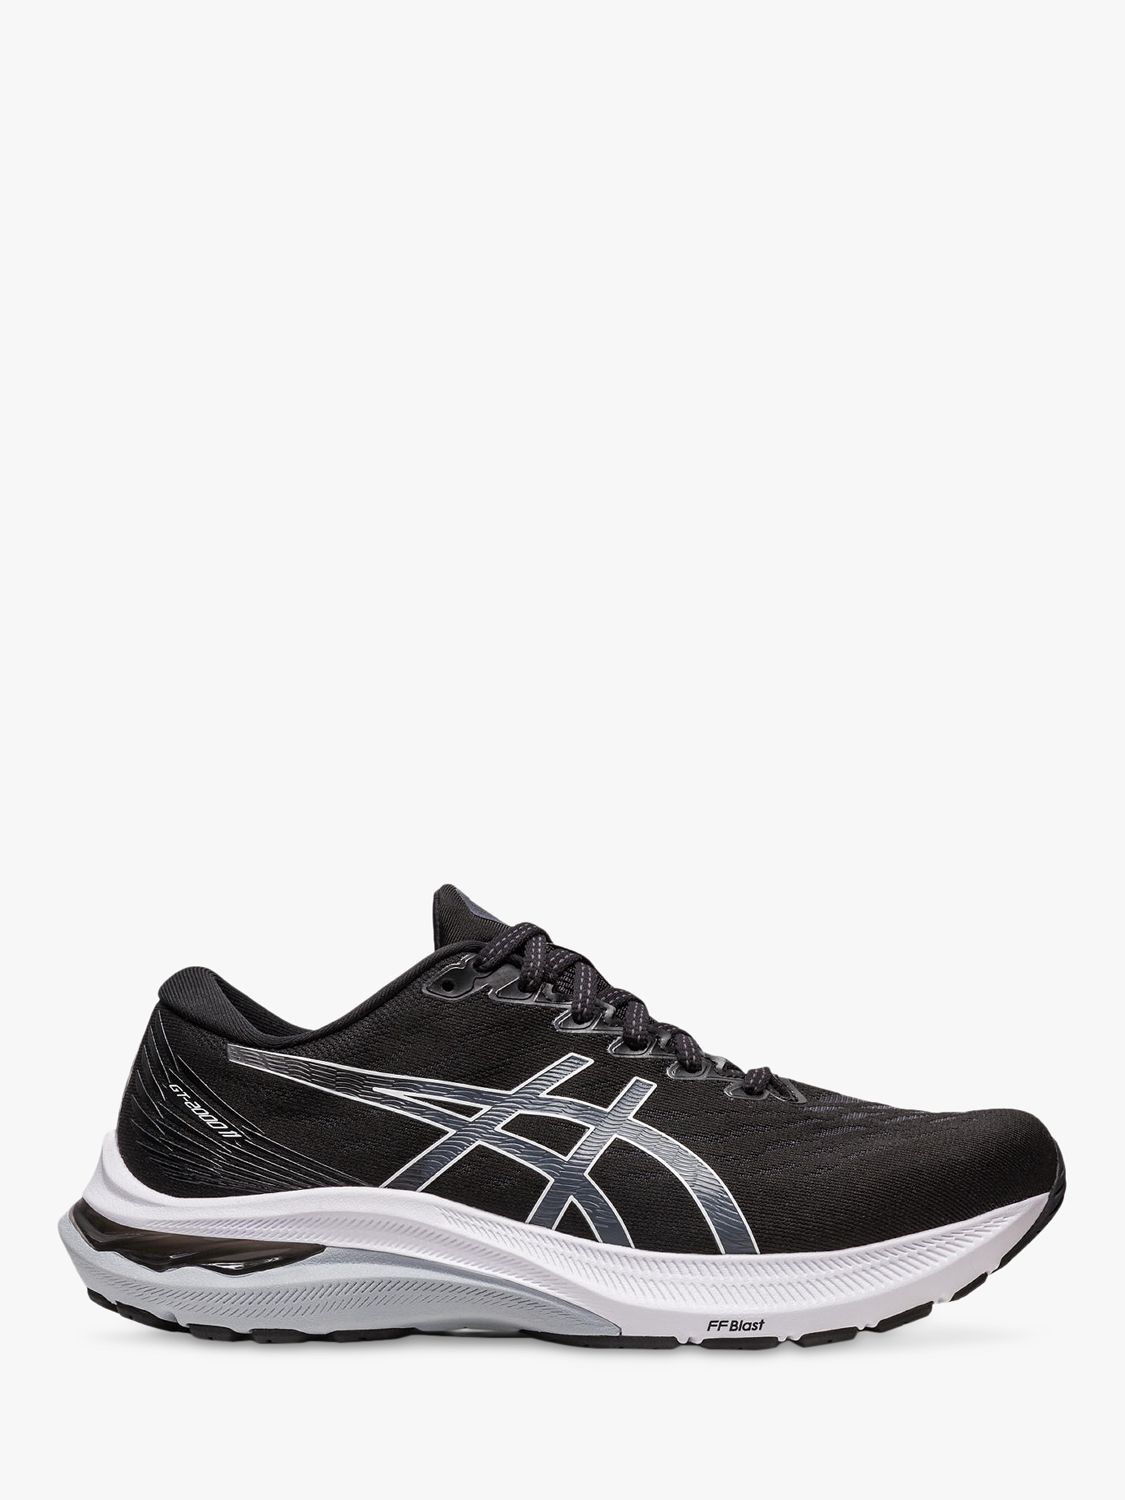 barro Misionero colonia ASICS GT-2000 11 Women's Running Shoes, Black/White at John Lewis & Partners